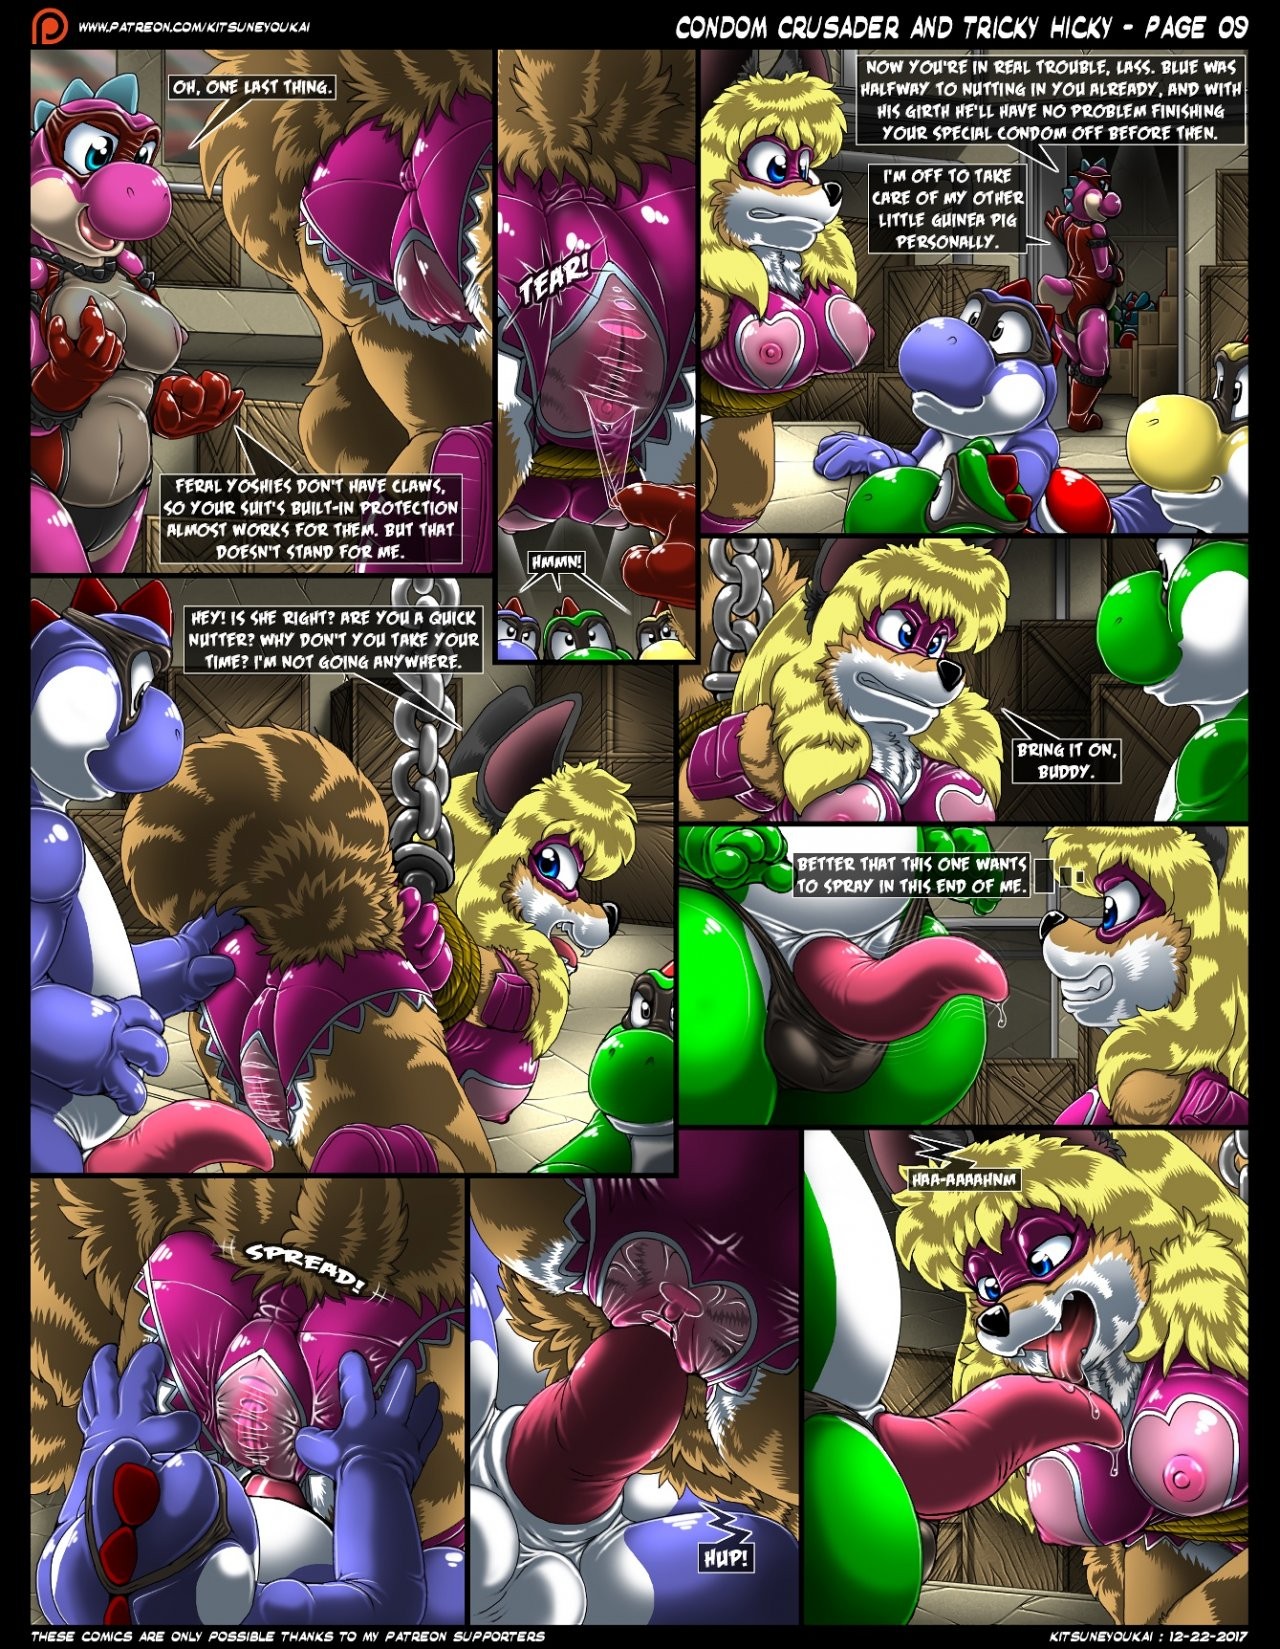 Condom Crusader and the Tricky Hicky porn comic picture 9